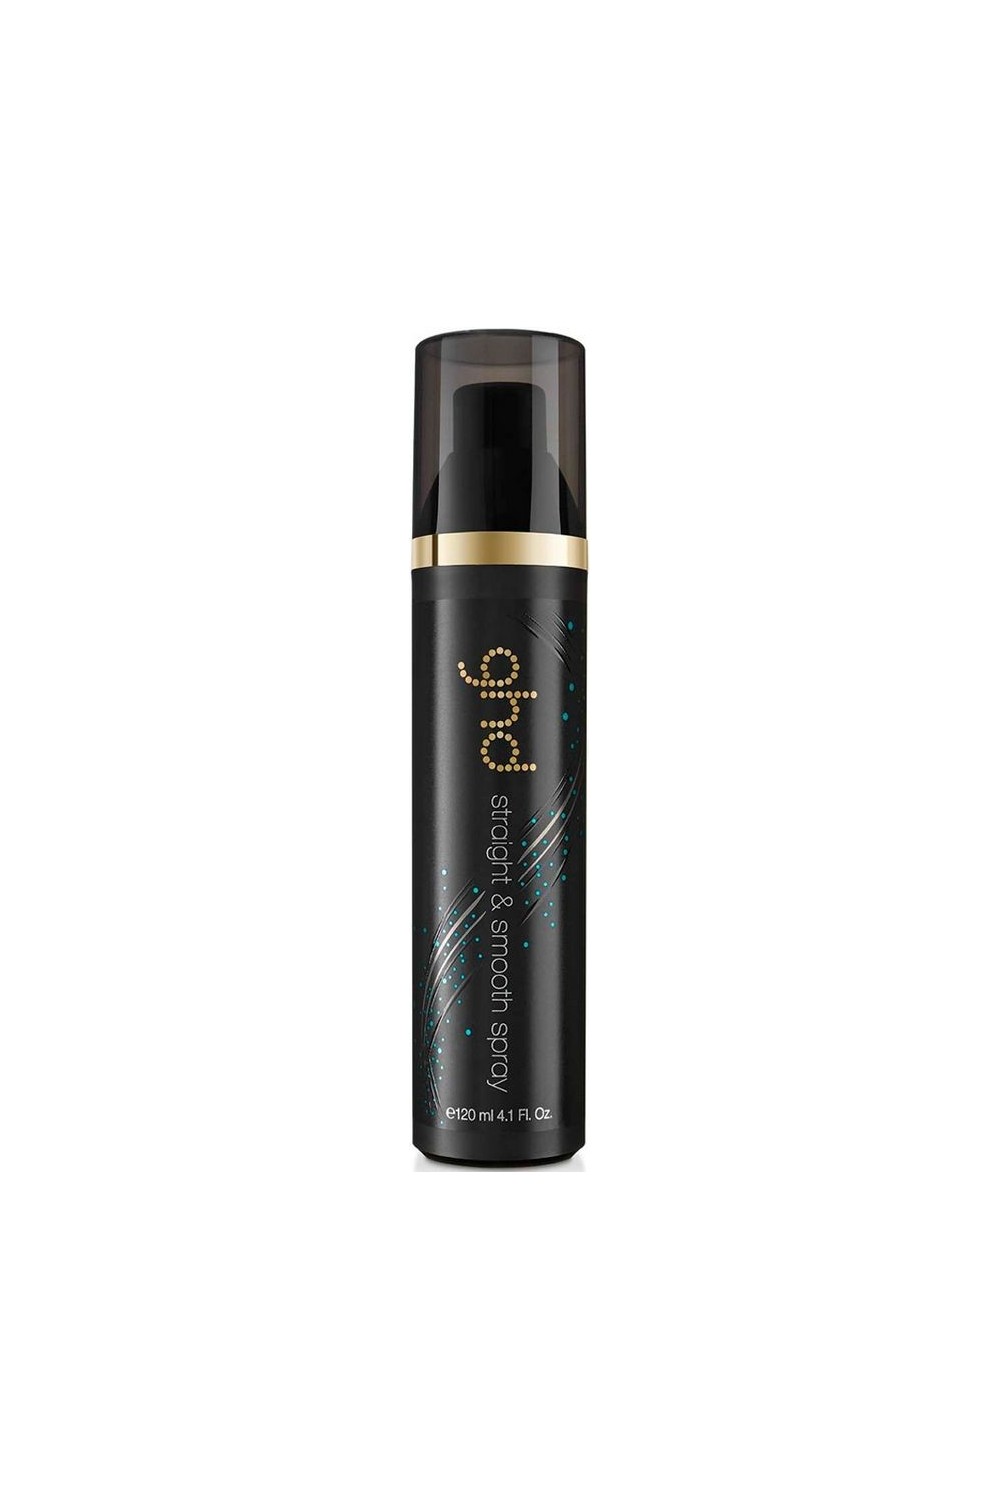 Ghd Style Straight And Smooth Spray 120ml